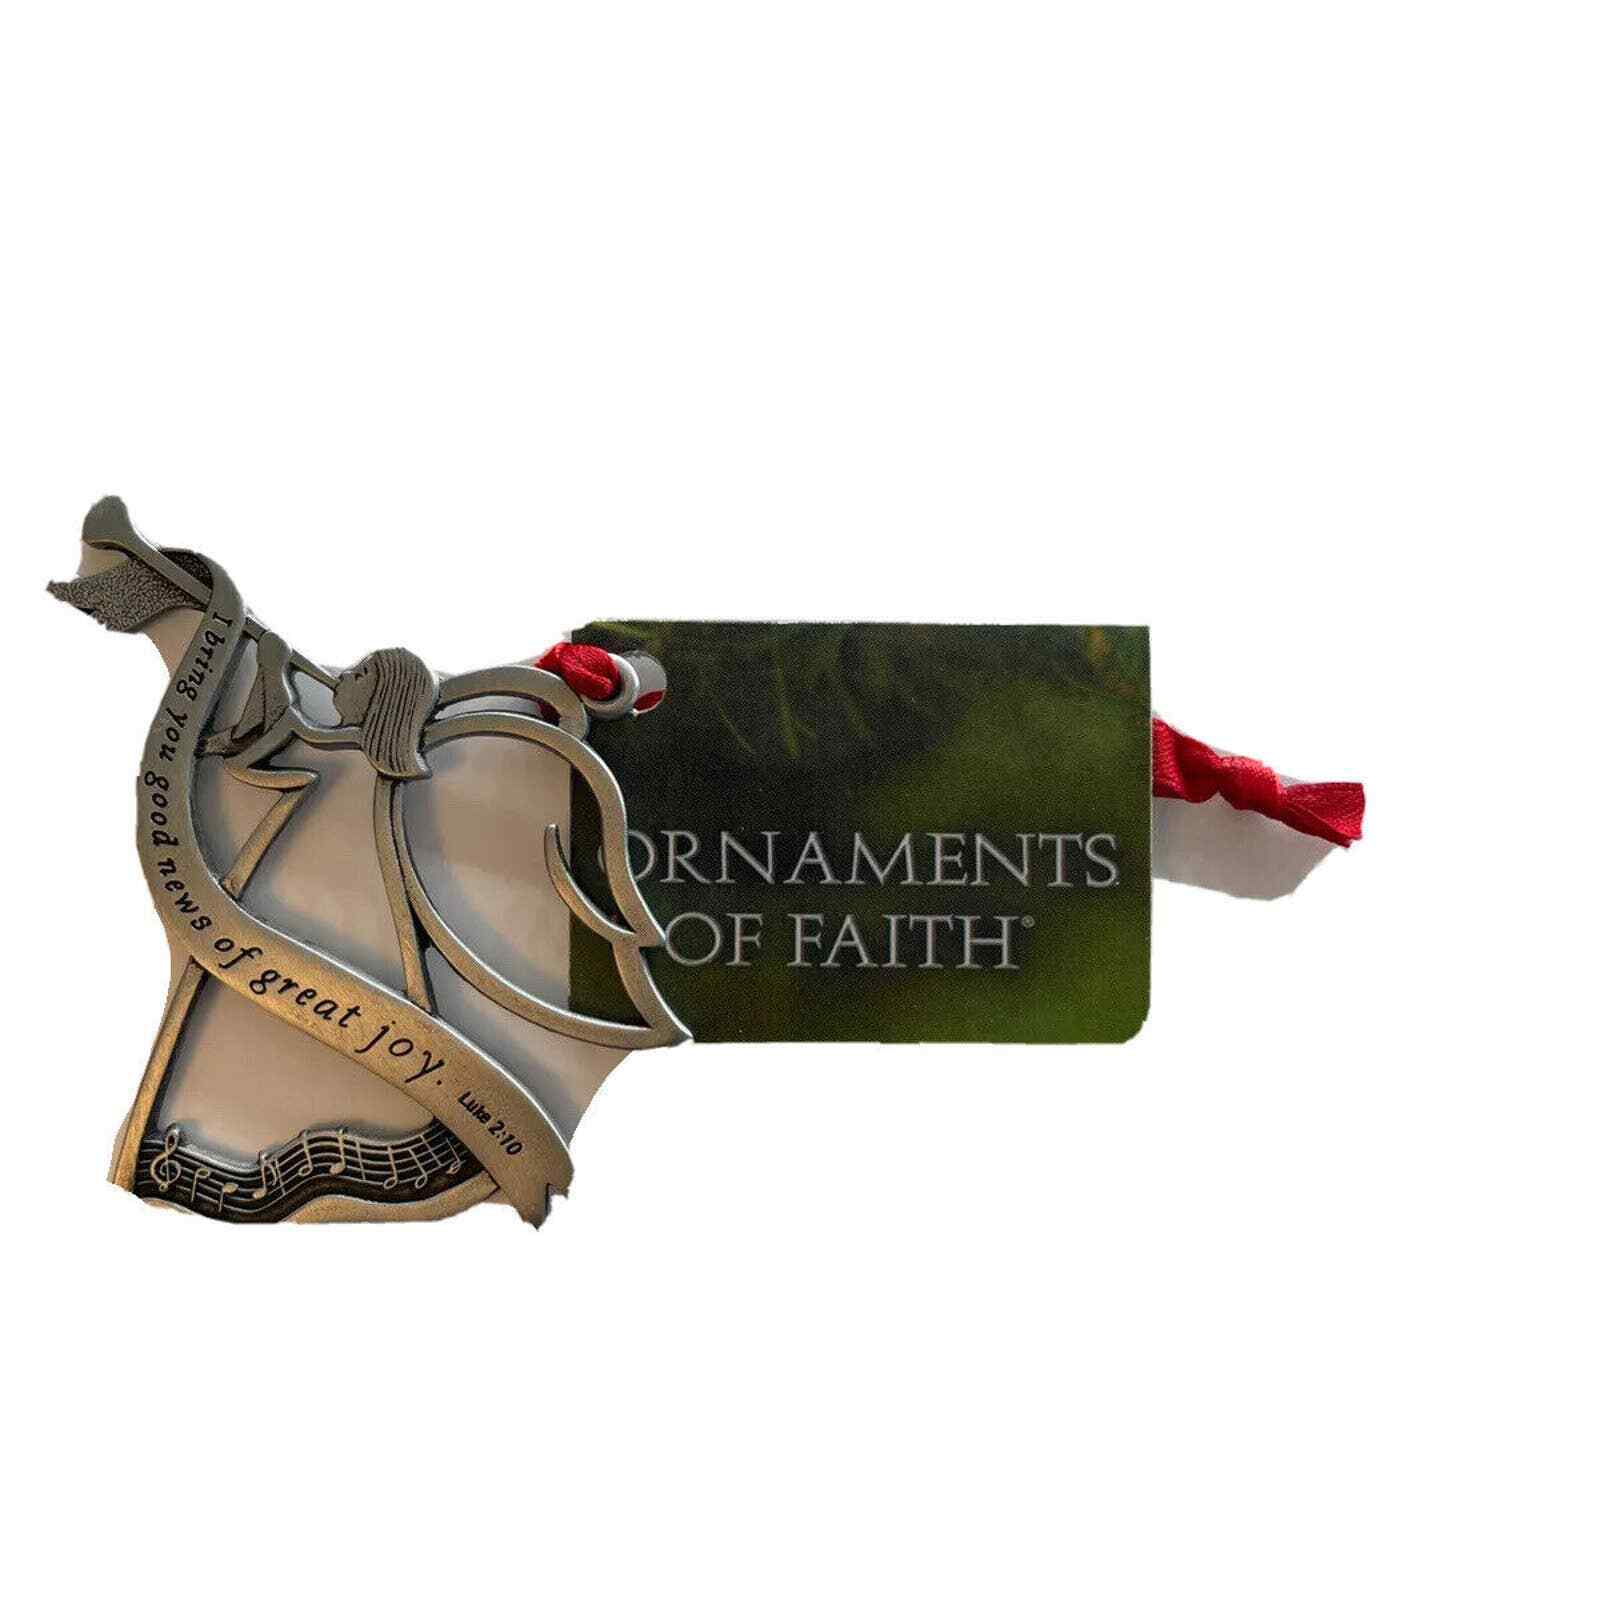 Ornaments Of Faith Pewter Christmas Angel Ornament 2012 Made In El Salvador 3pk